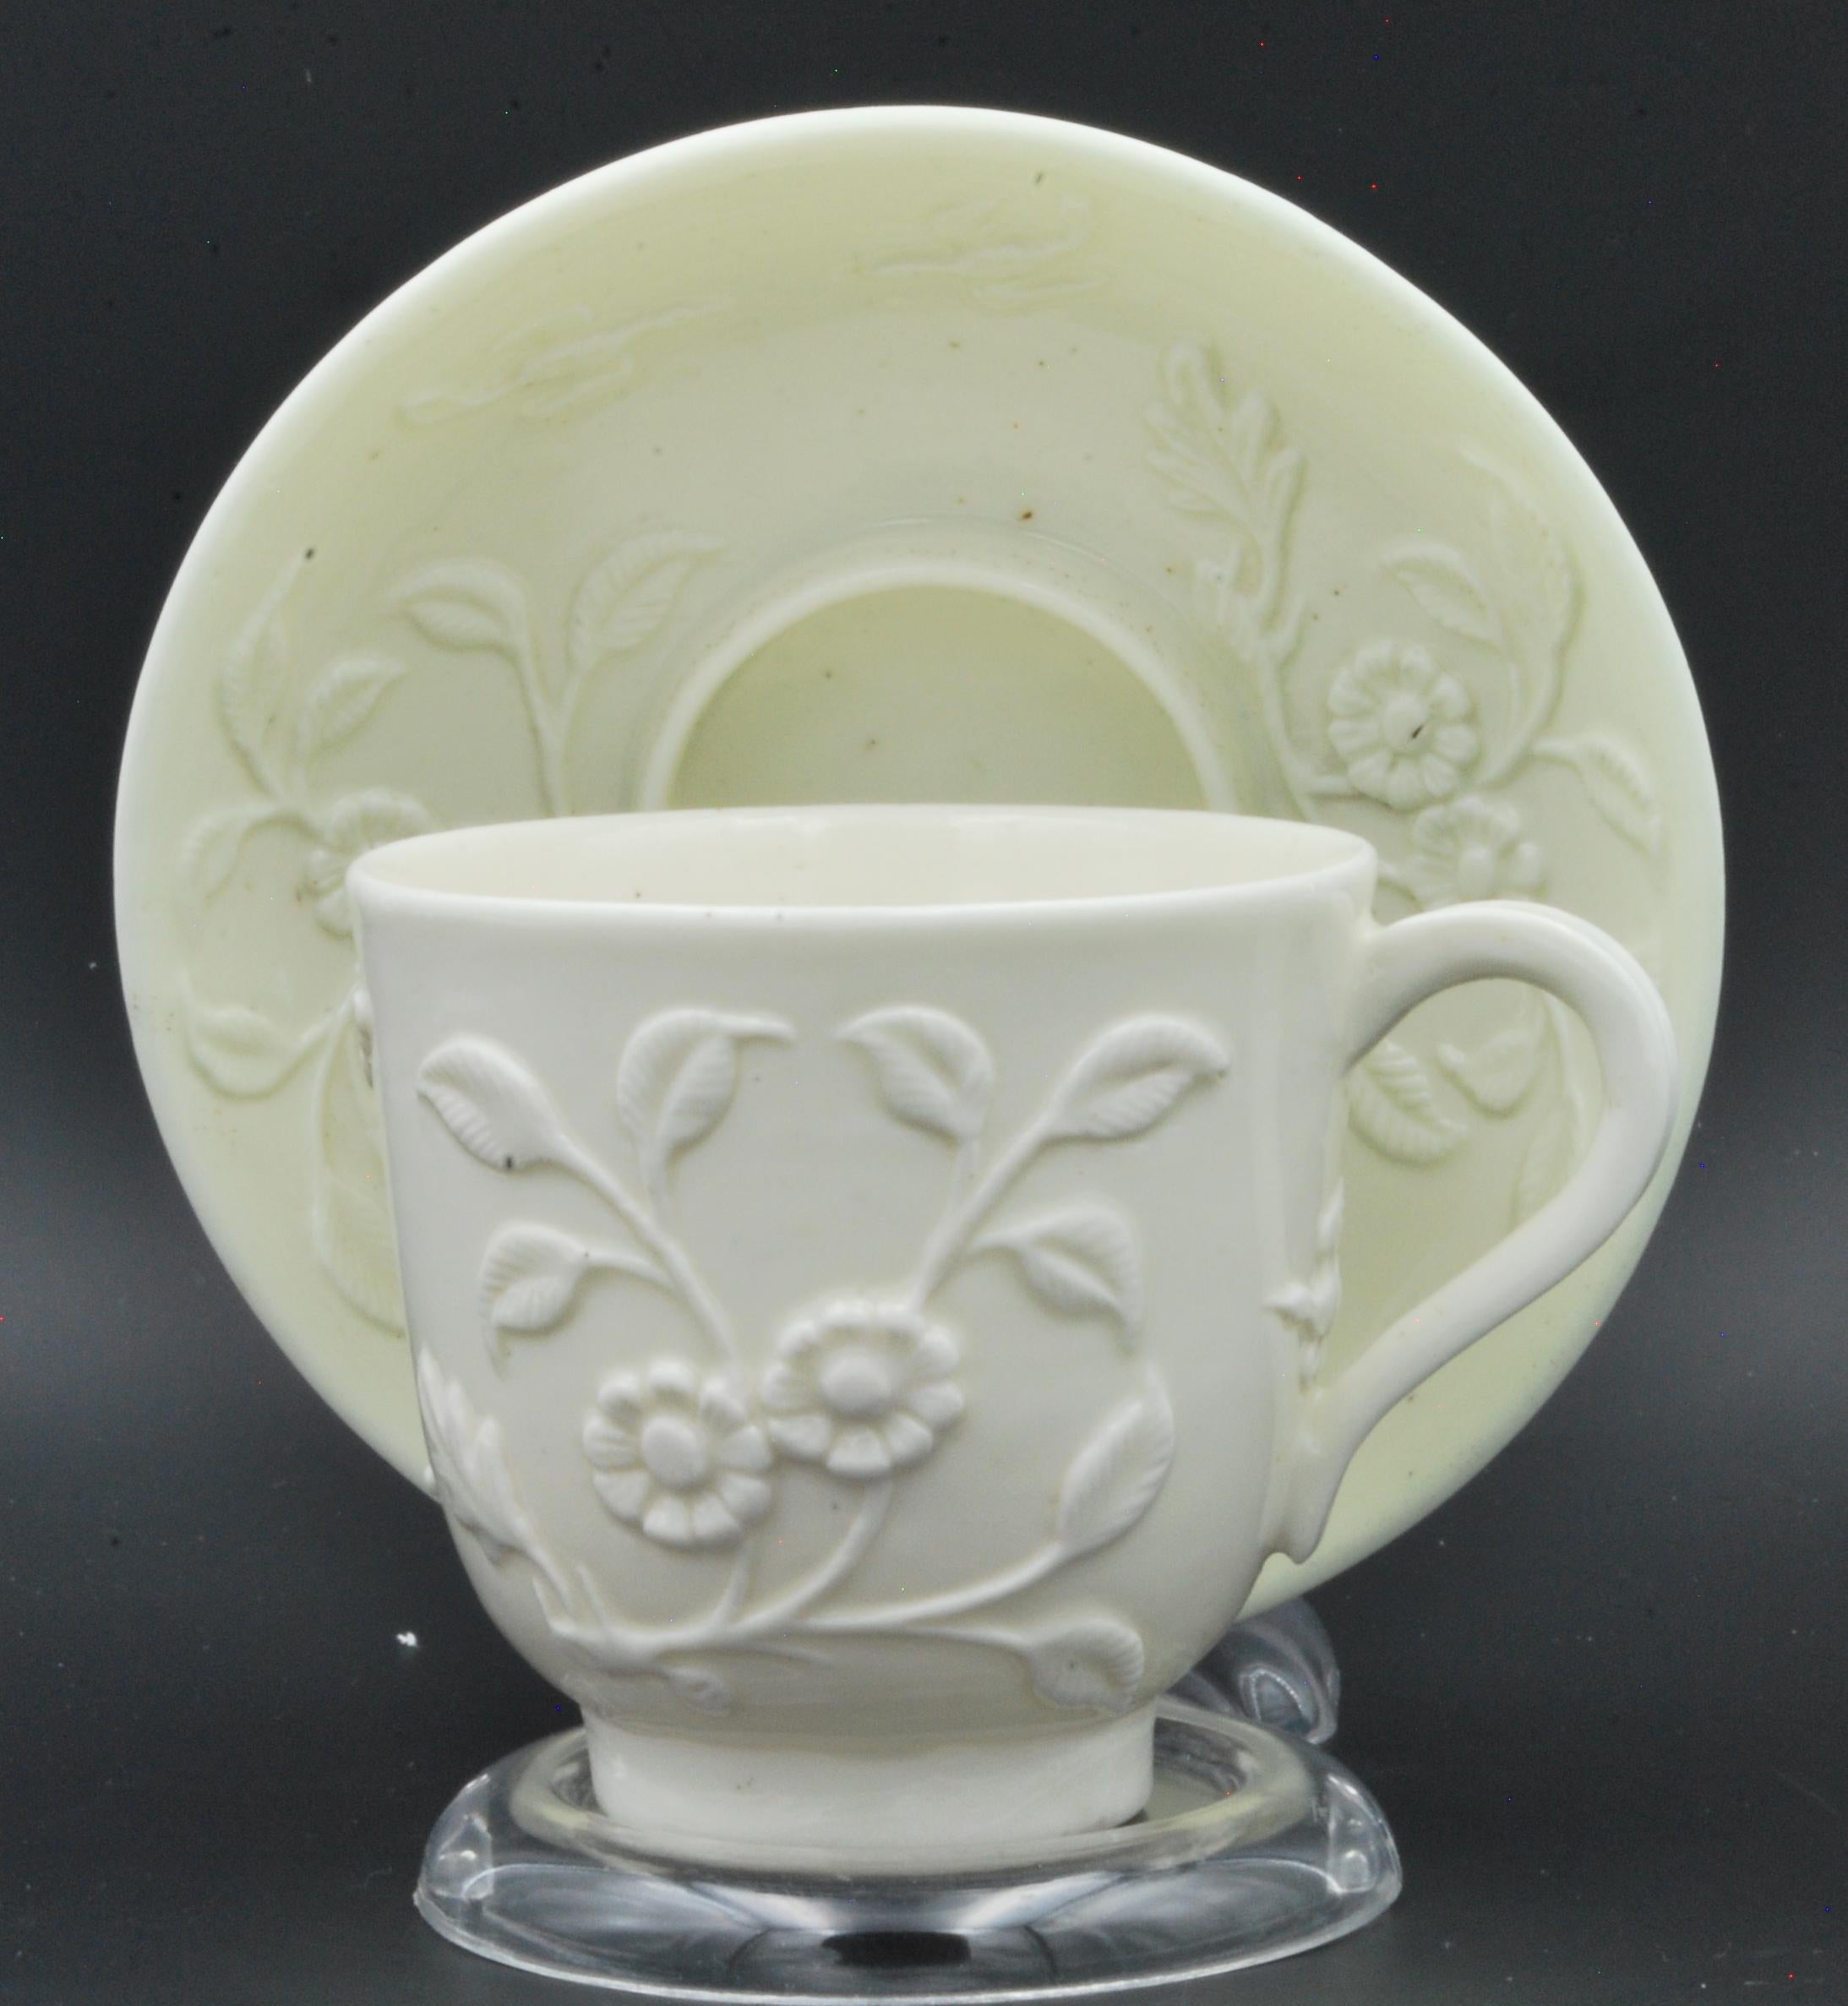 A most attractive and unusual pattern on this early example of French porcelain. While suggests a coffee cup to modern eyes, the decoration of tea plants in flower definitely says this was intended for tea.

Cup & saucer are both marked.